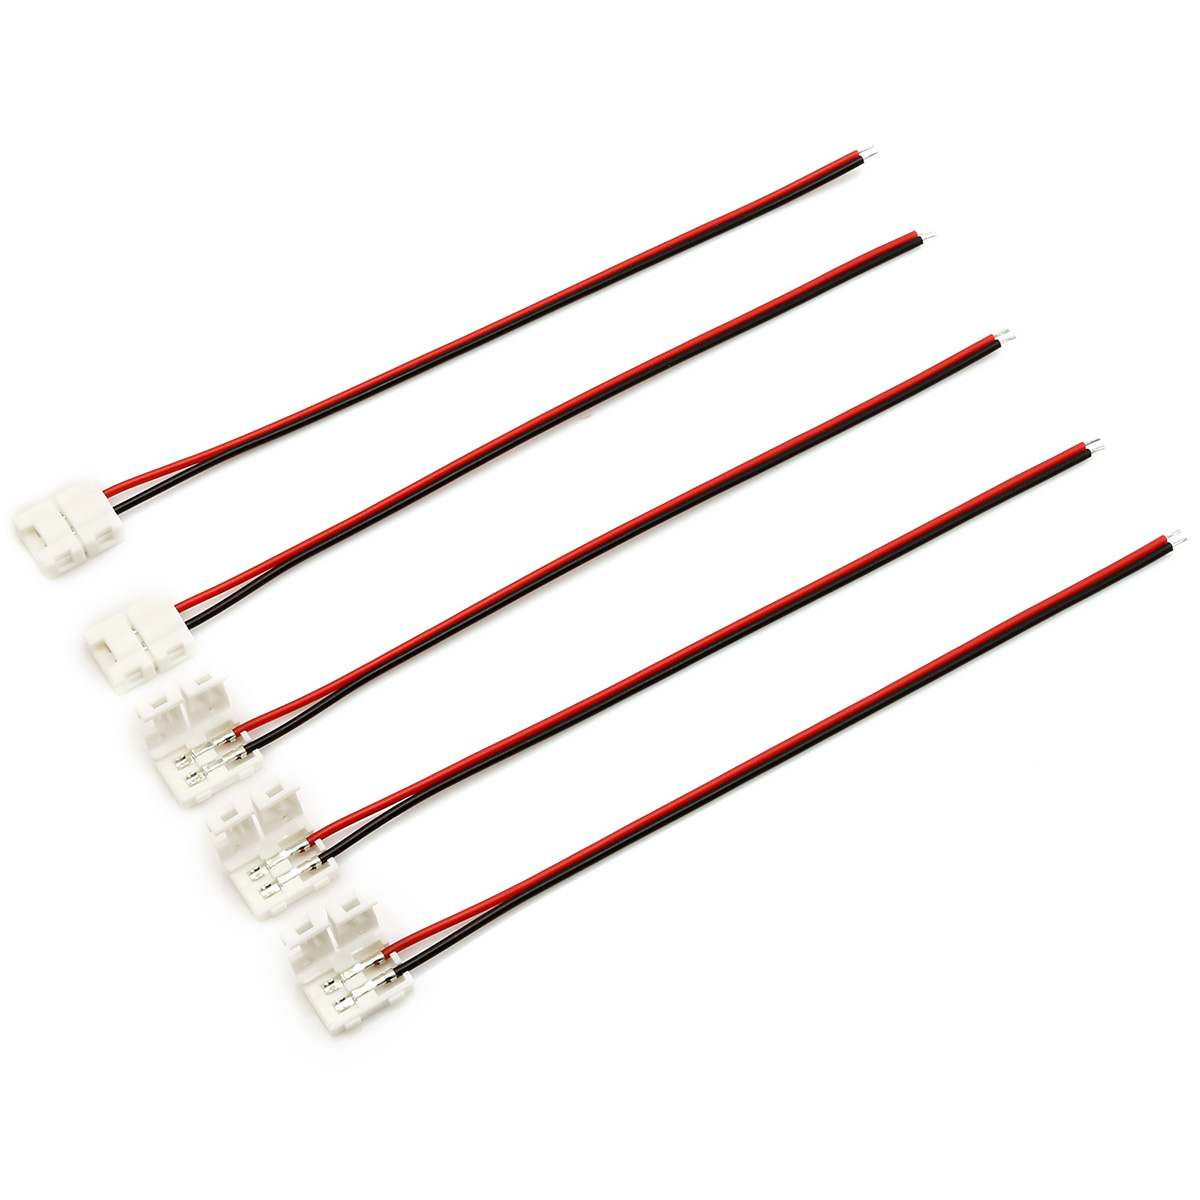 2-Pin 4-Pin 5-Pin For 3528 5050 RGB RGBW LED Light Connector Cable ...